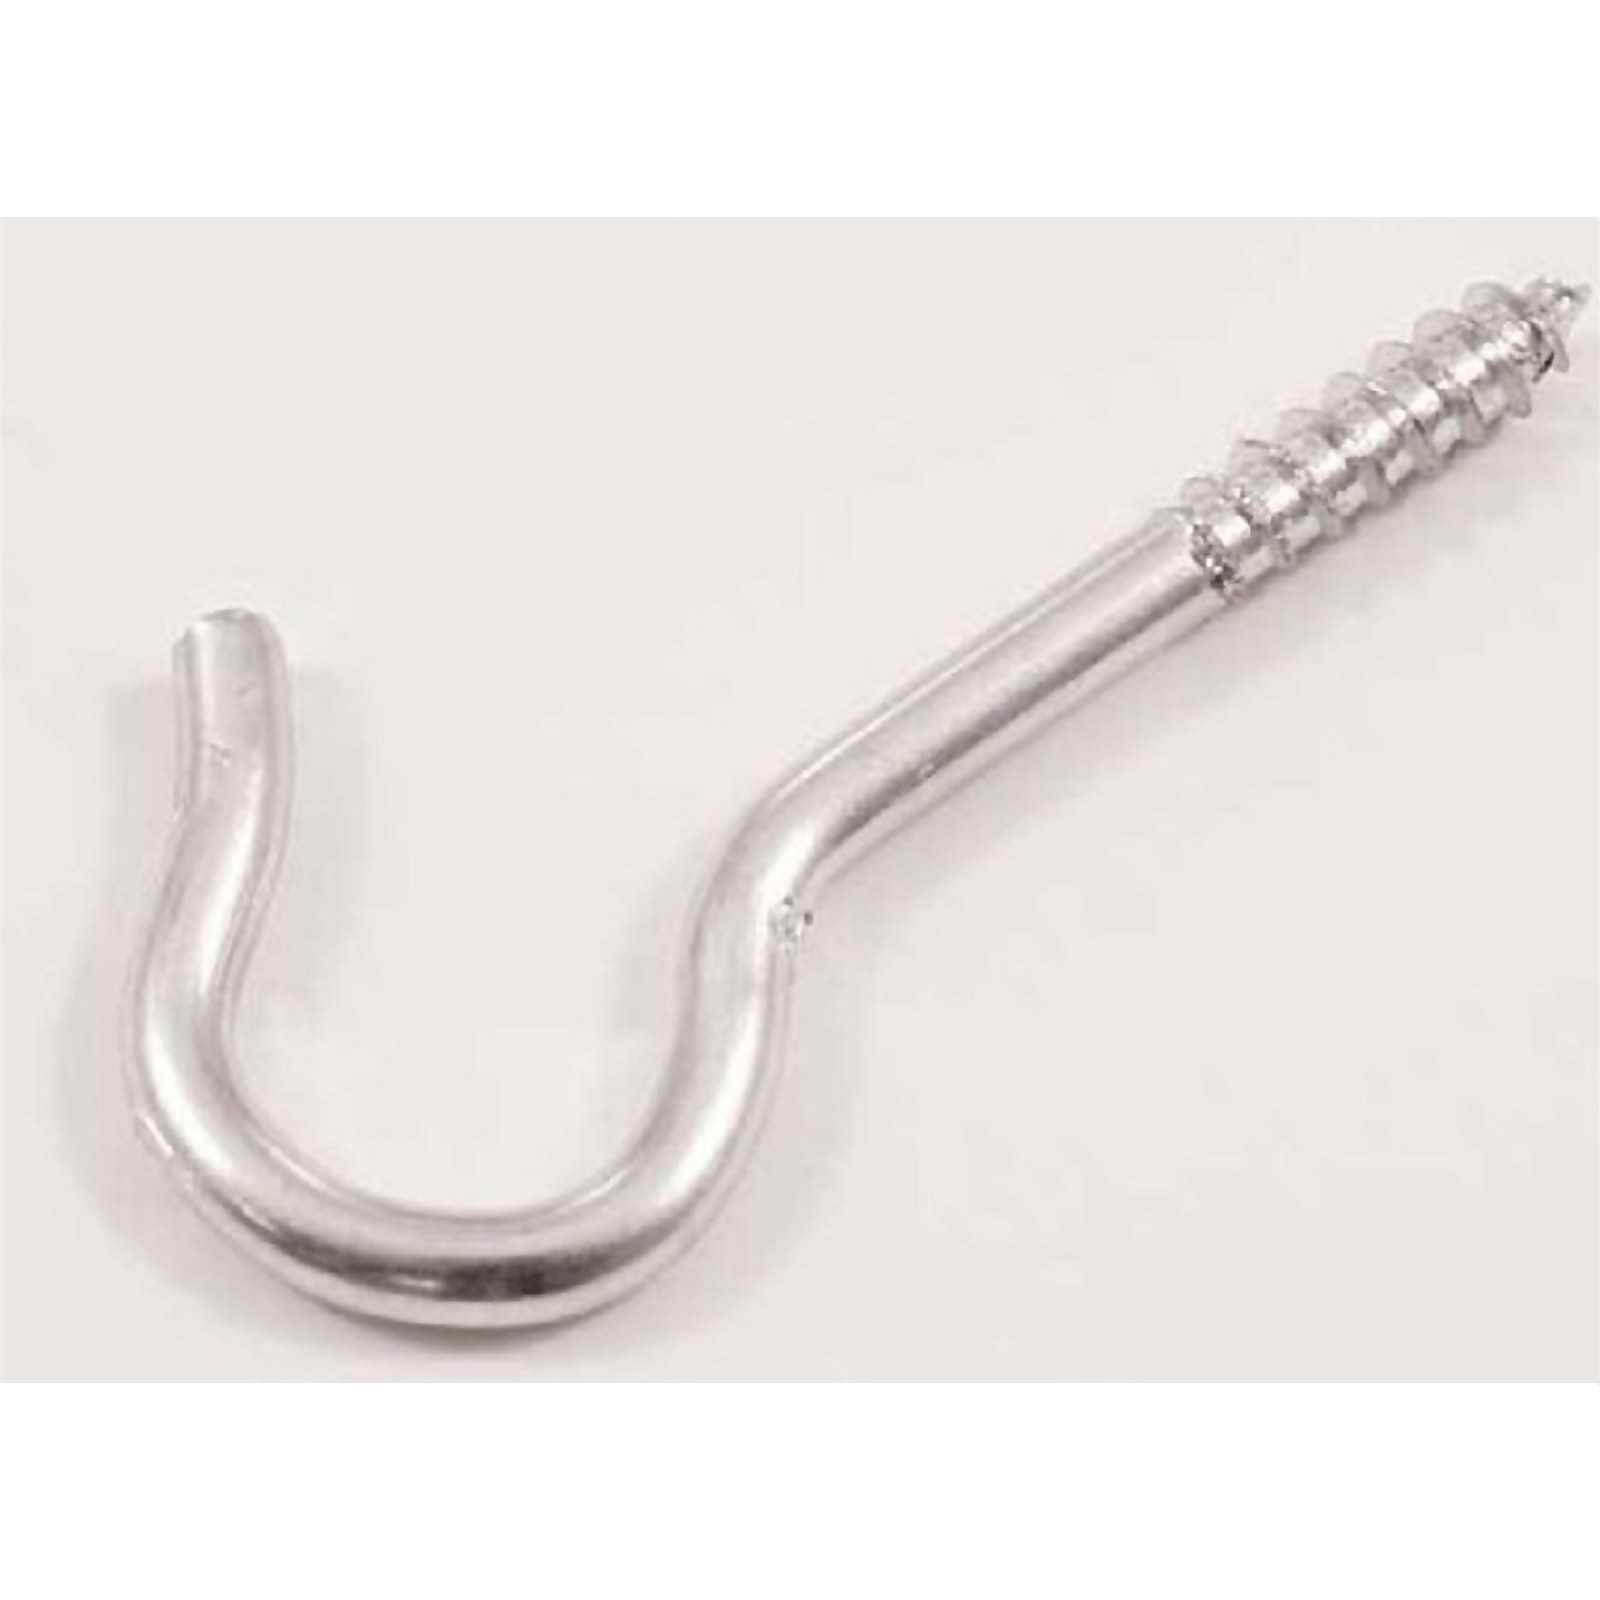 Photo of Screw Hook - Zinc Plated - 60mm - 2 Pack